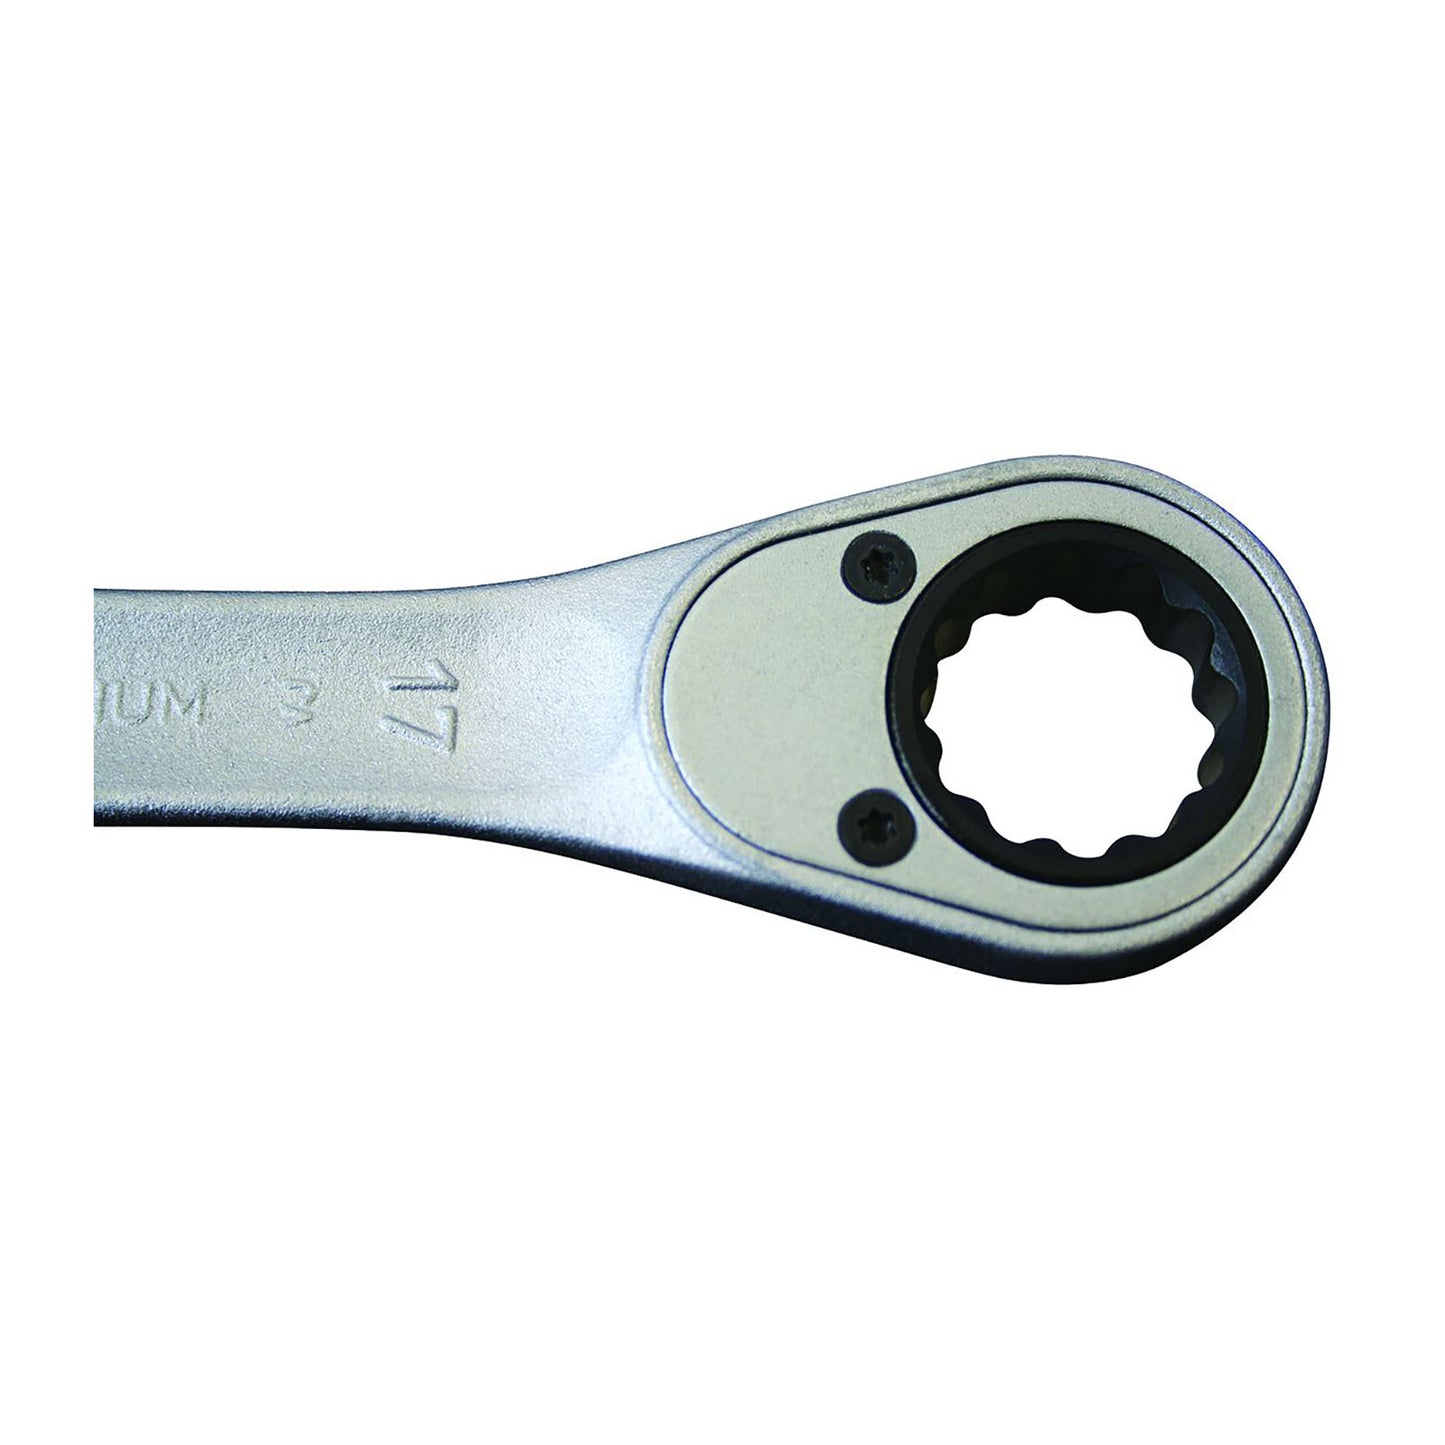 GEDORE 7 R 13 - Ratchet combination wrench, 13mm (2297116)